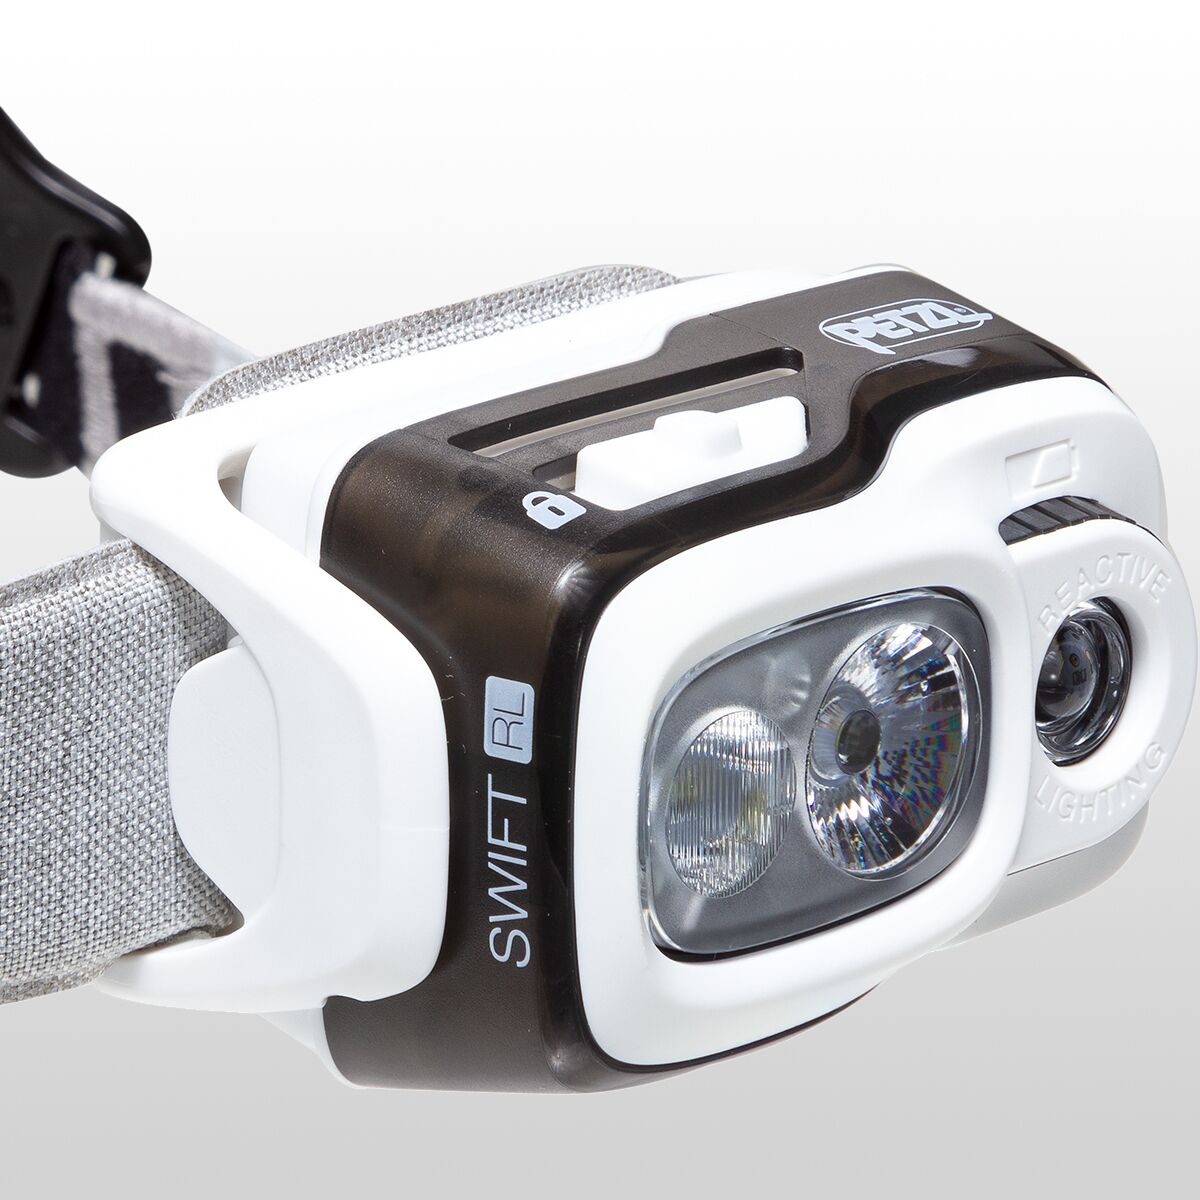 Lampe frontale pour le sport trail running PETZL Swift RL